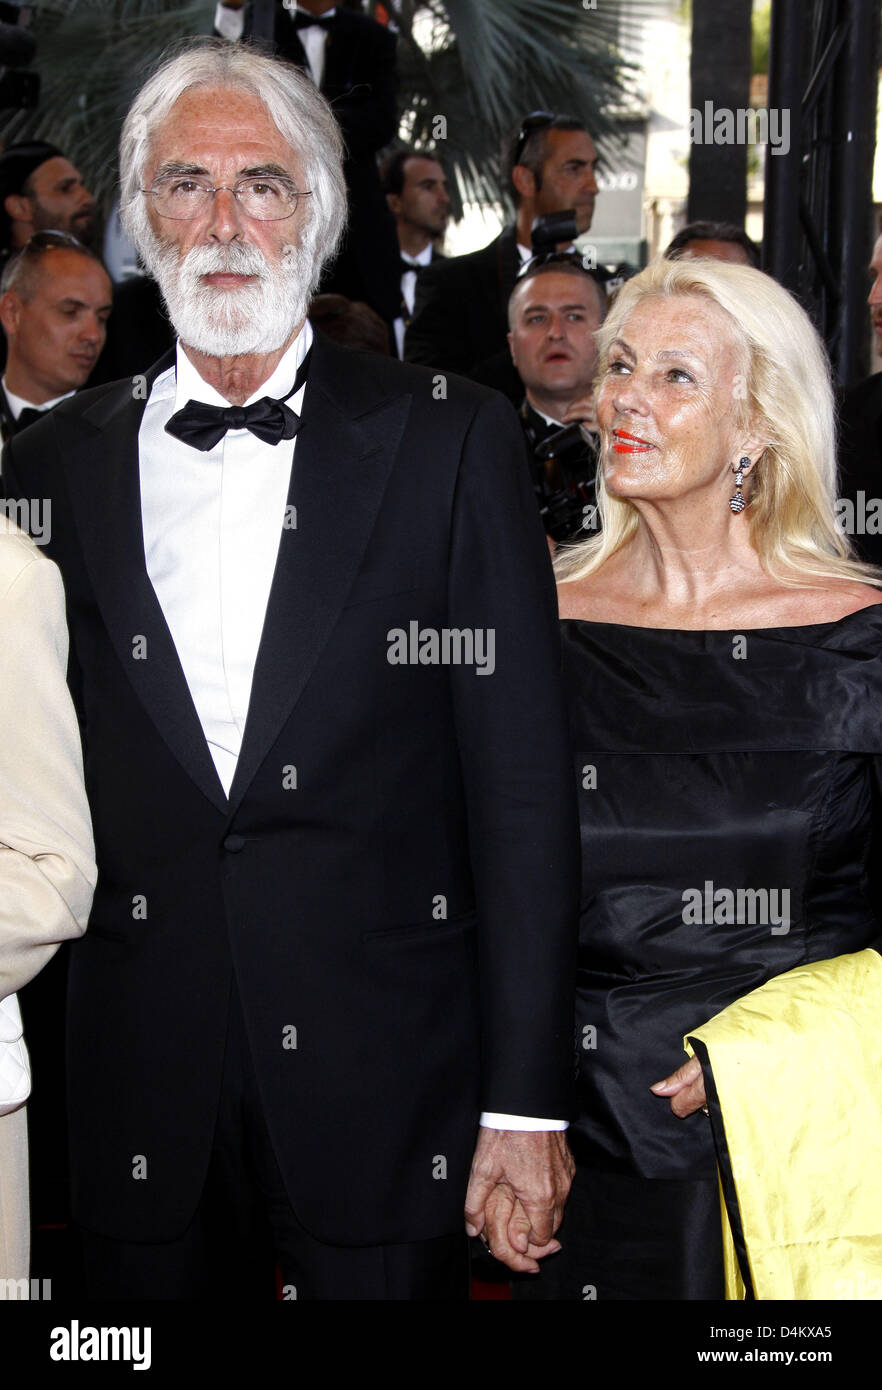 Austrian director Michael Haneke and his wife Suzie arrive for the award ceremony at the 2009 Cannes Film Festival in Cannes, France, 24 May 2009. Haneke won the Palme d?Or Award for his film ?The White Ribbon?. Photo: Hubert Boesl Stock Photo